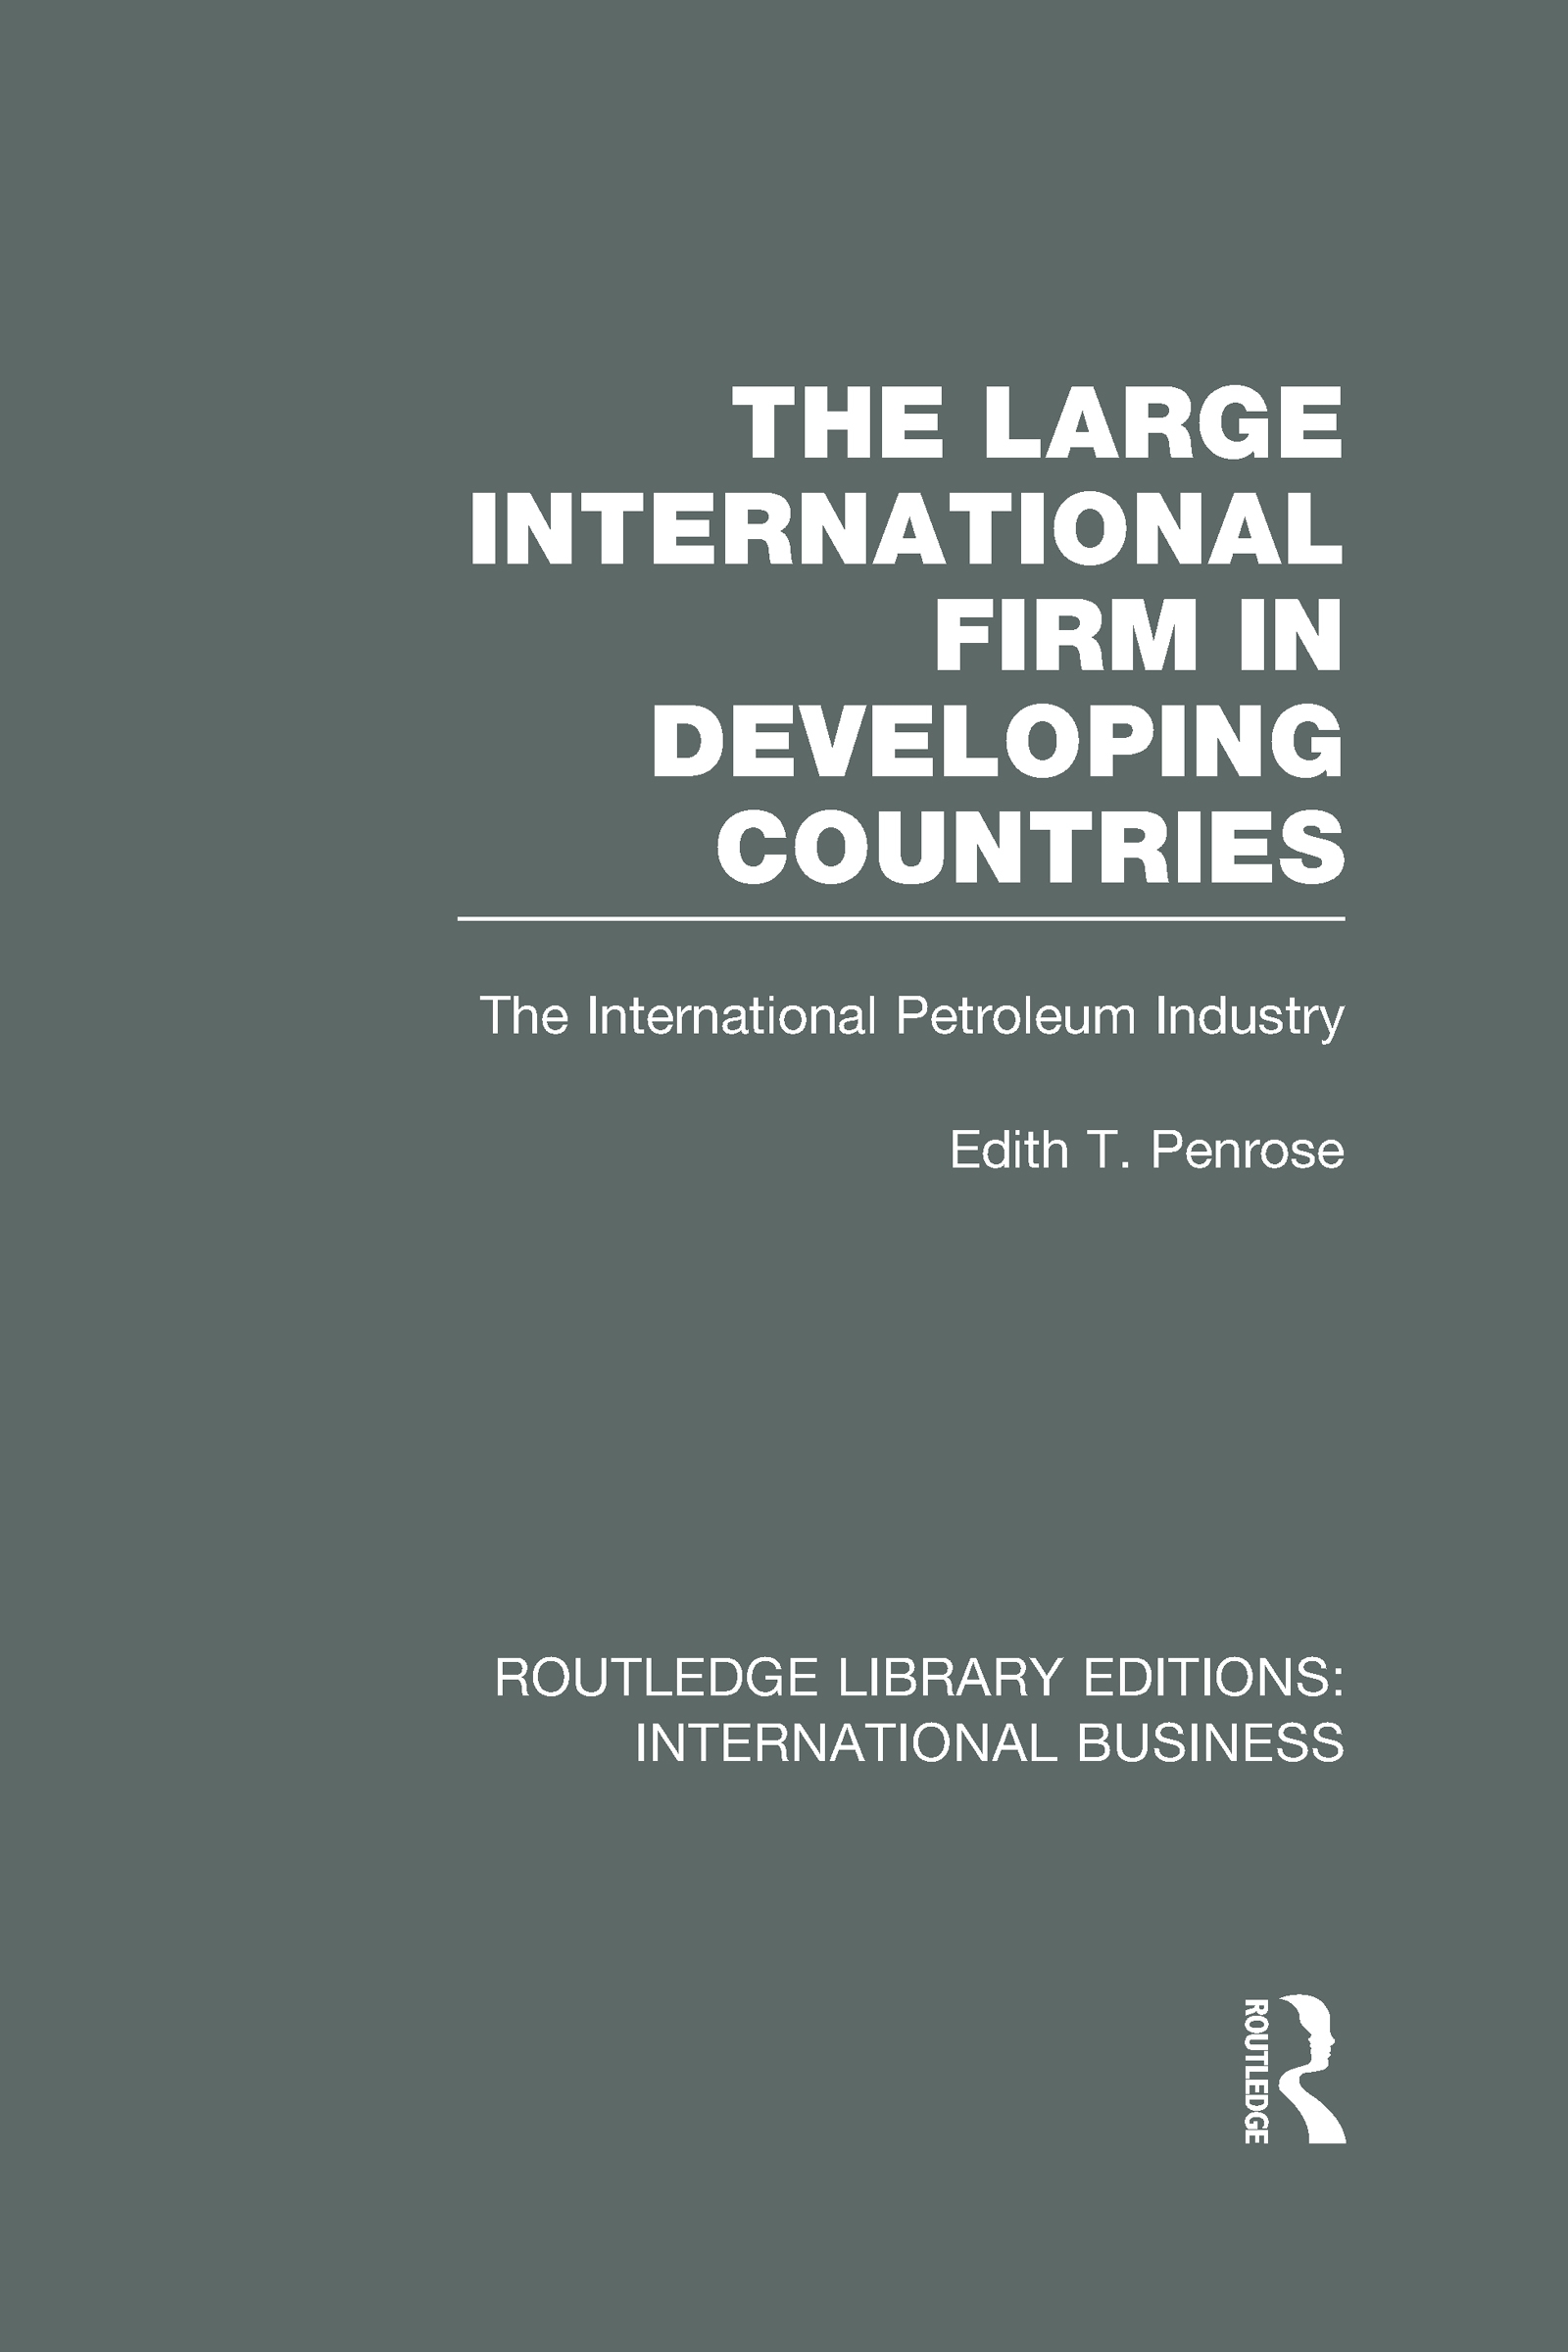 The Large International Firm in Developing Business: The International Petroleum Industry, With a Chapter on the Oil Industry in